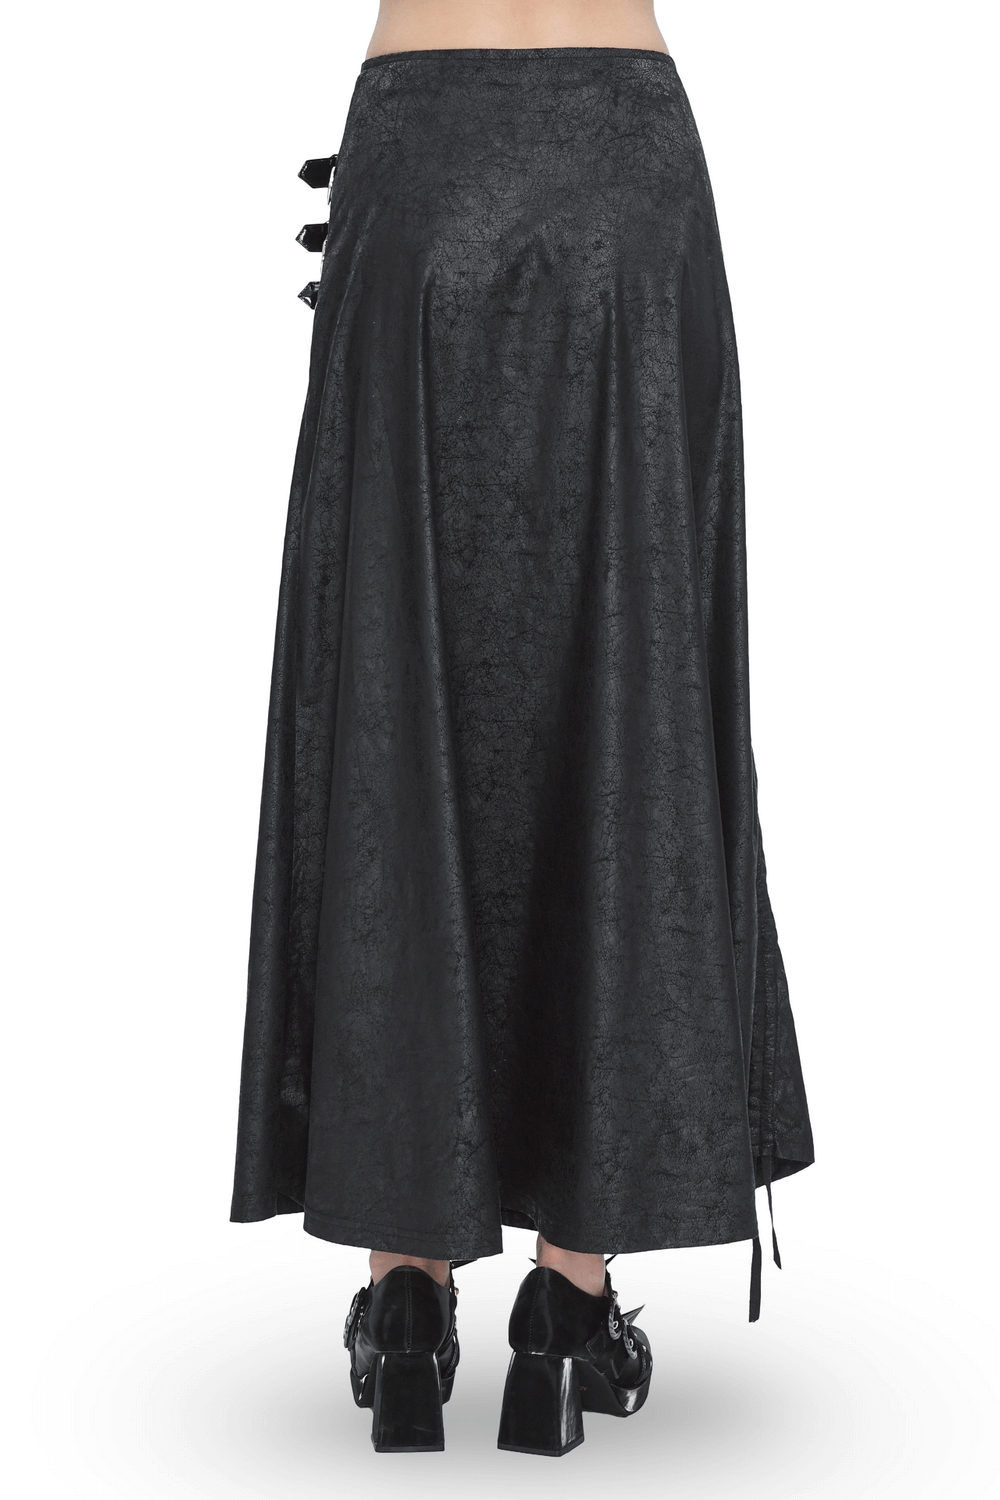 Chic Black Faux Leather Buckled Long Skirt With Slit